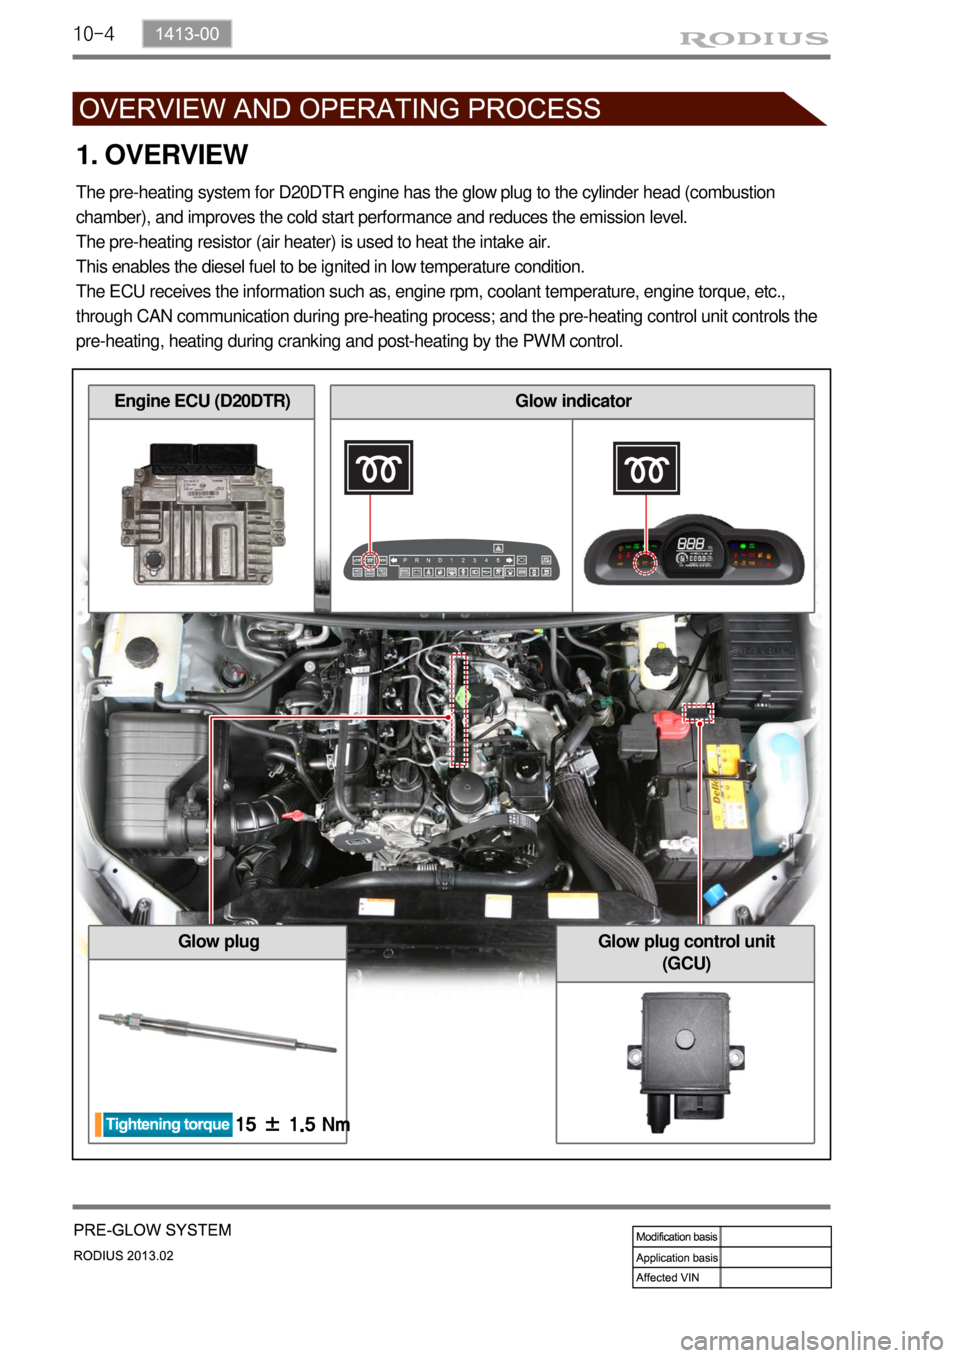 SSANGYONG TURISMO 2013  Service Manual 10-4
1. OVERVIEW
The pre-heating system for D20DTR engine has the glow plug to the cylinder head (combustion 
chamber), and improves the cold start performance and reduces the emission level.
The pre-